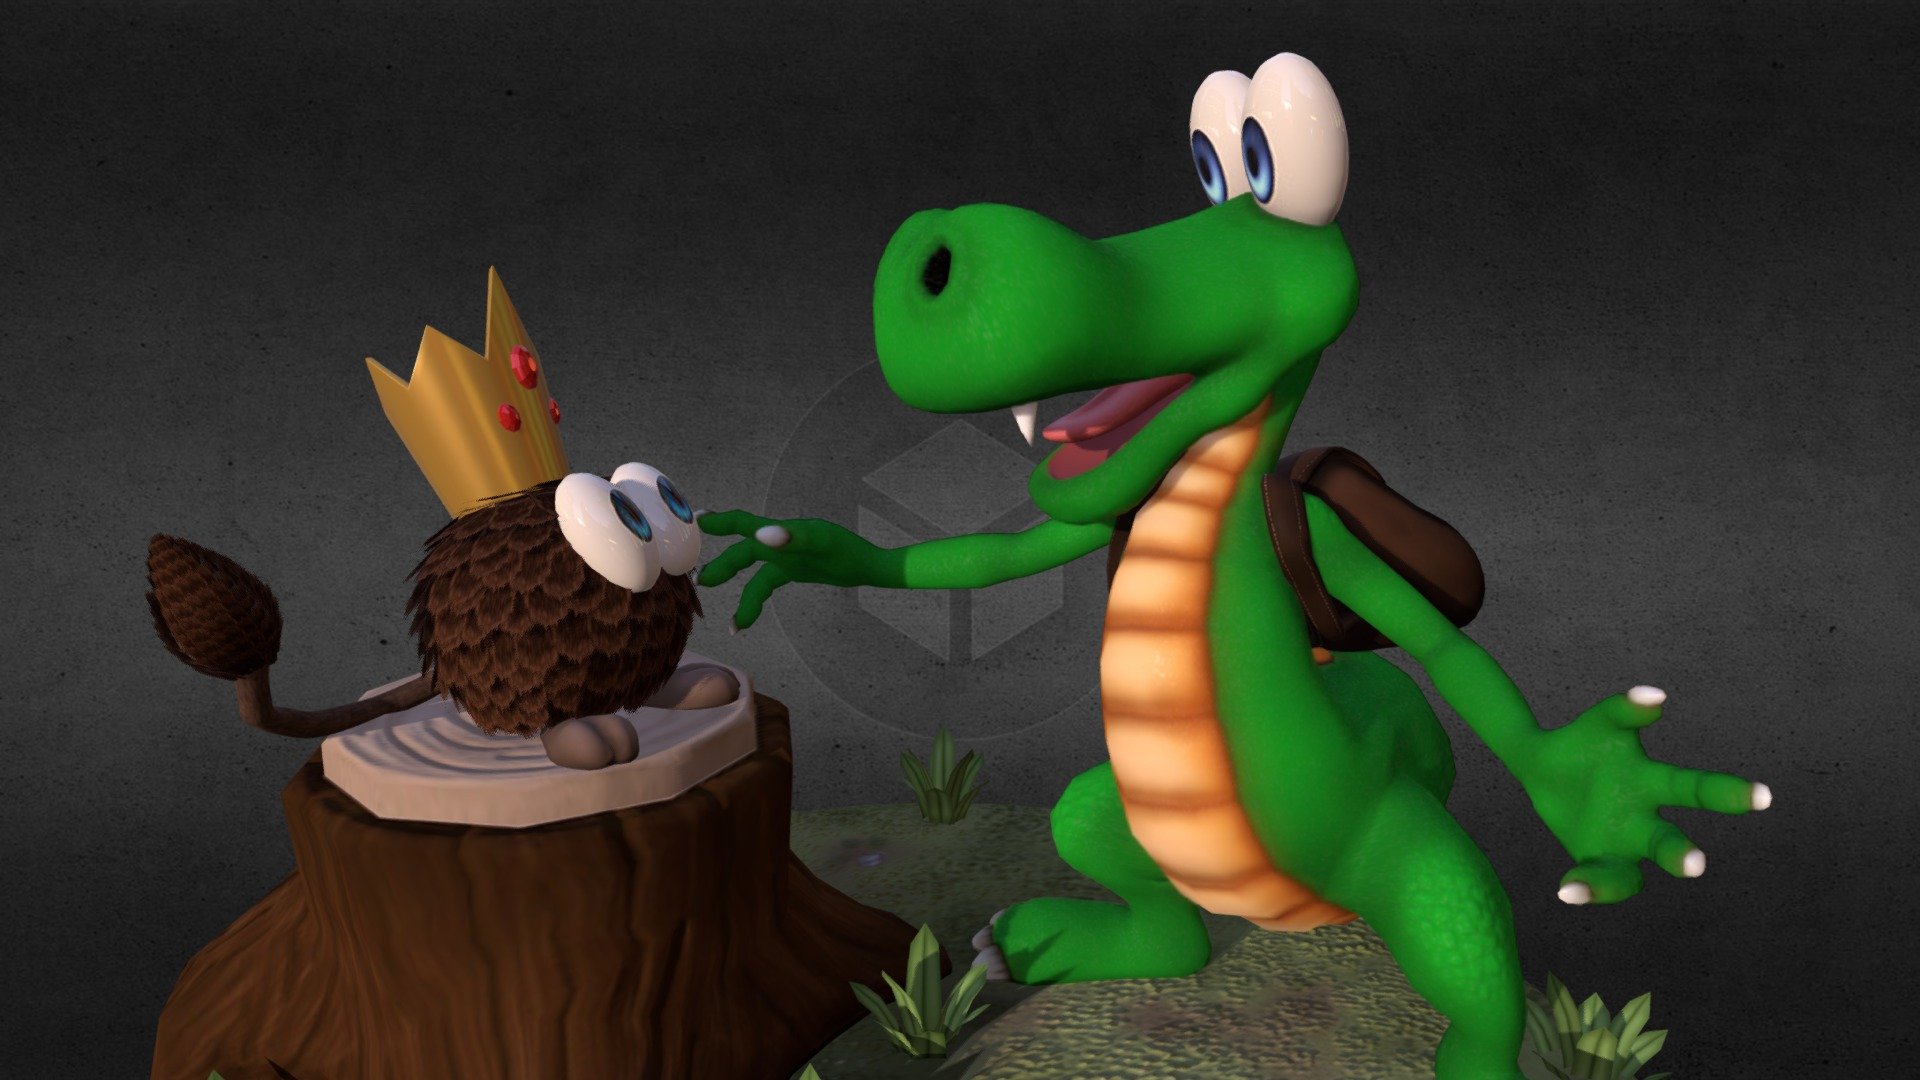 Final submission for #retrogasm2018. 

I chose to recreate my favourite game character Croc for this competition. It has been a fun learning experience and extremely nostalgic 3d model